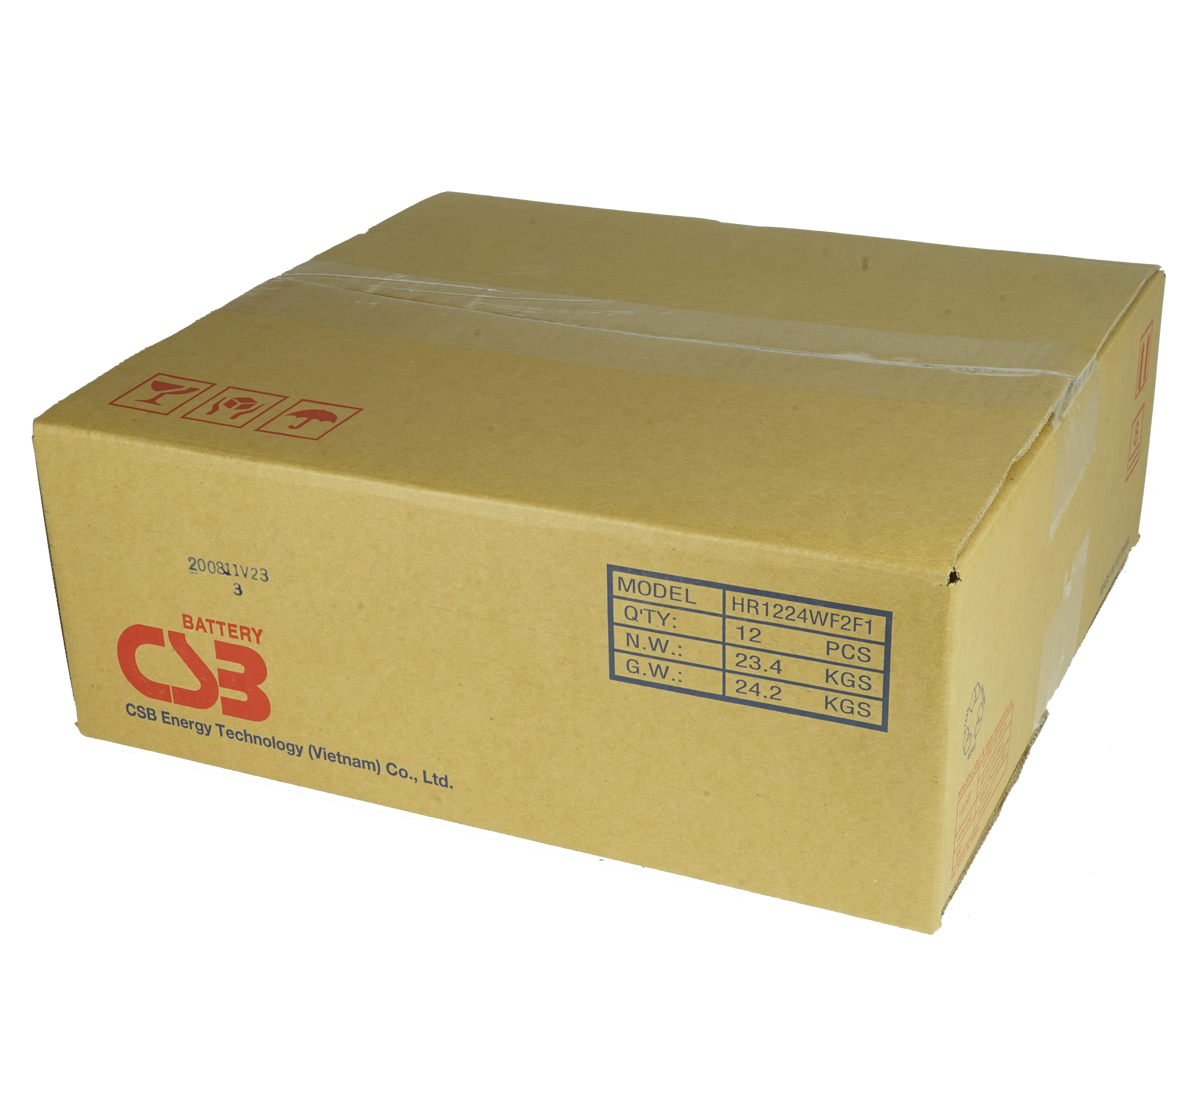 MDS1019 UPS Battery Kit for MGE AB1019